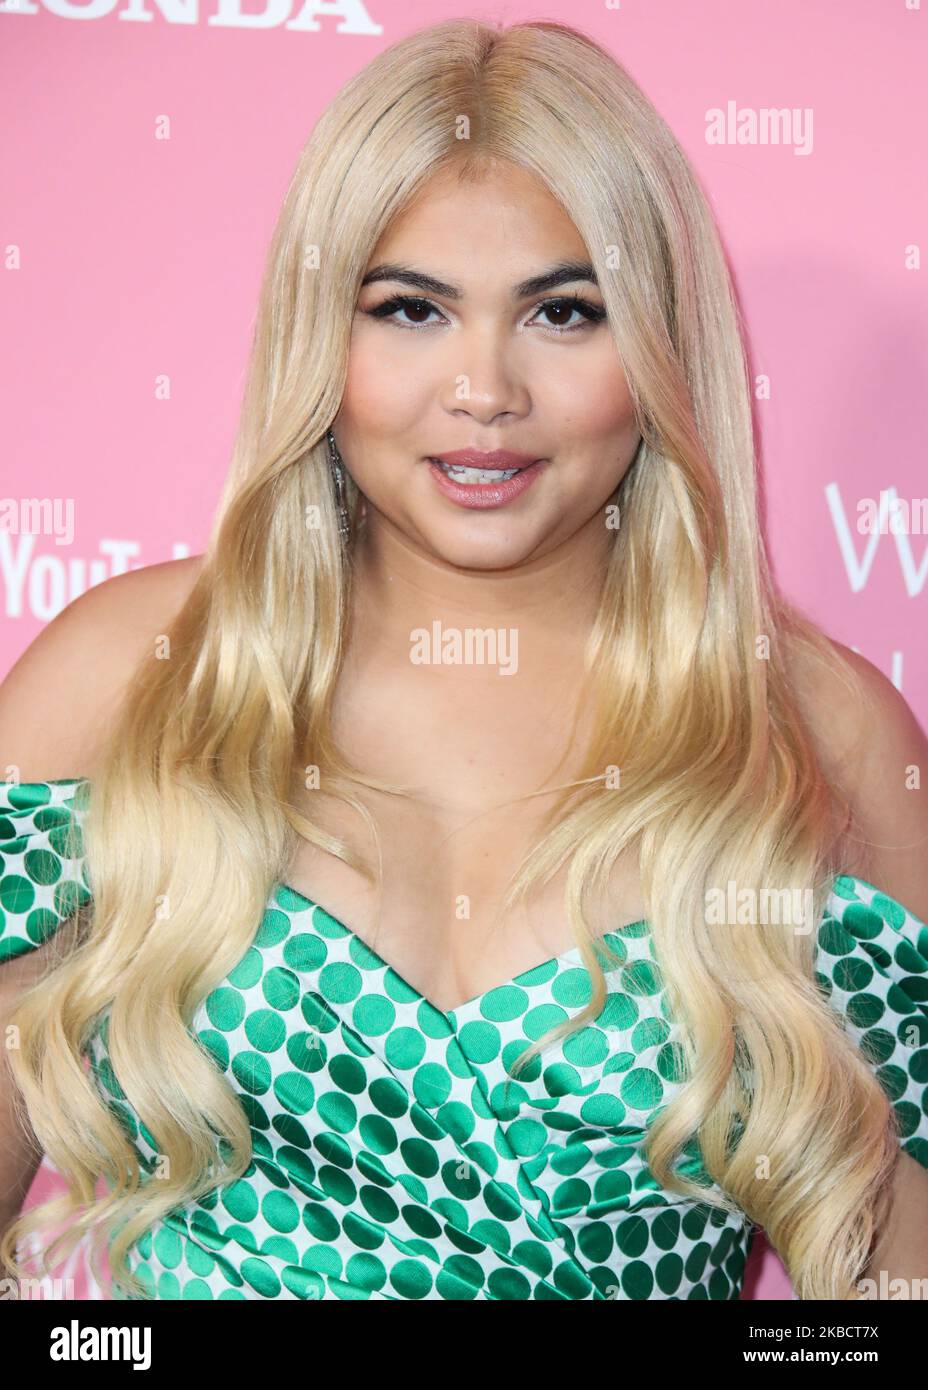 HOLLYWOOD, LOS ANGELES, CALIFORNIA, USA - DECEMBER 12: Singer Hayley Kiyoko arrives at the 2019 Billboard Women In Music Presented By YouTube Music held at the Hollywood Palladium on December 12, 2019 in Hollywood, Los Angeles, California, United States. (Photo by Xavier Collin/Image Press Agency/NurPhoto) Stock Photo